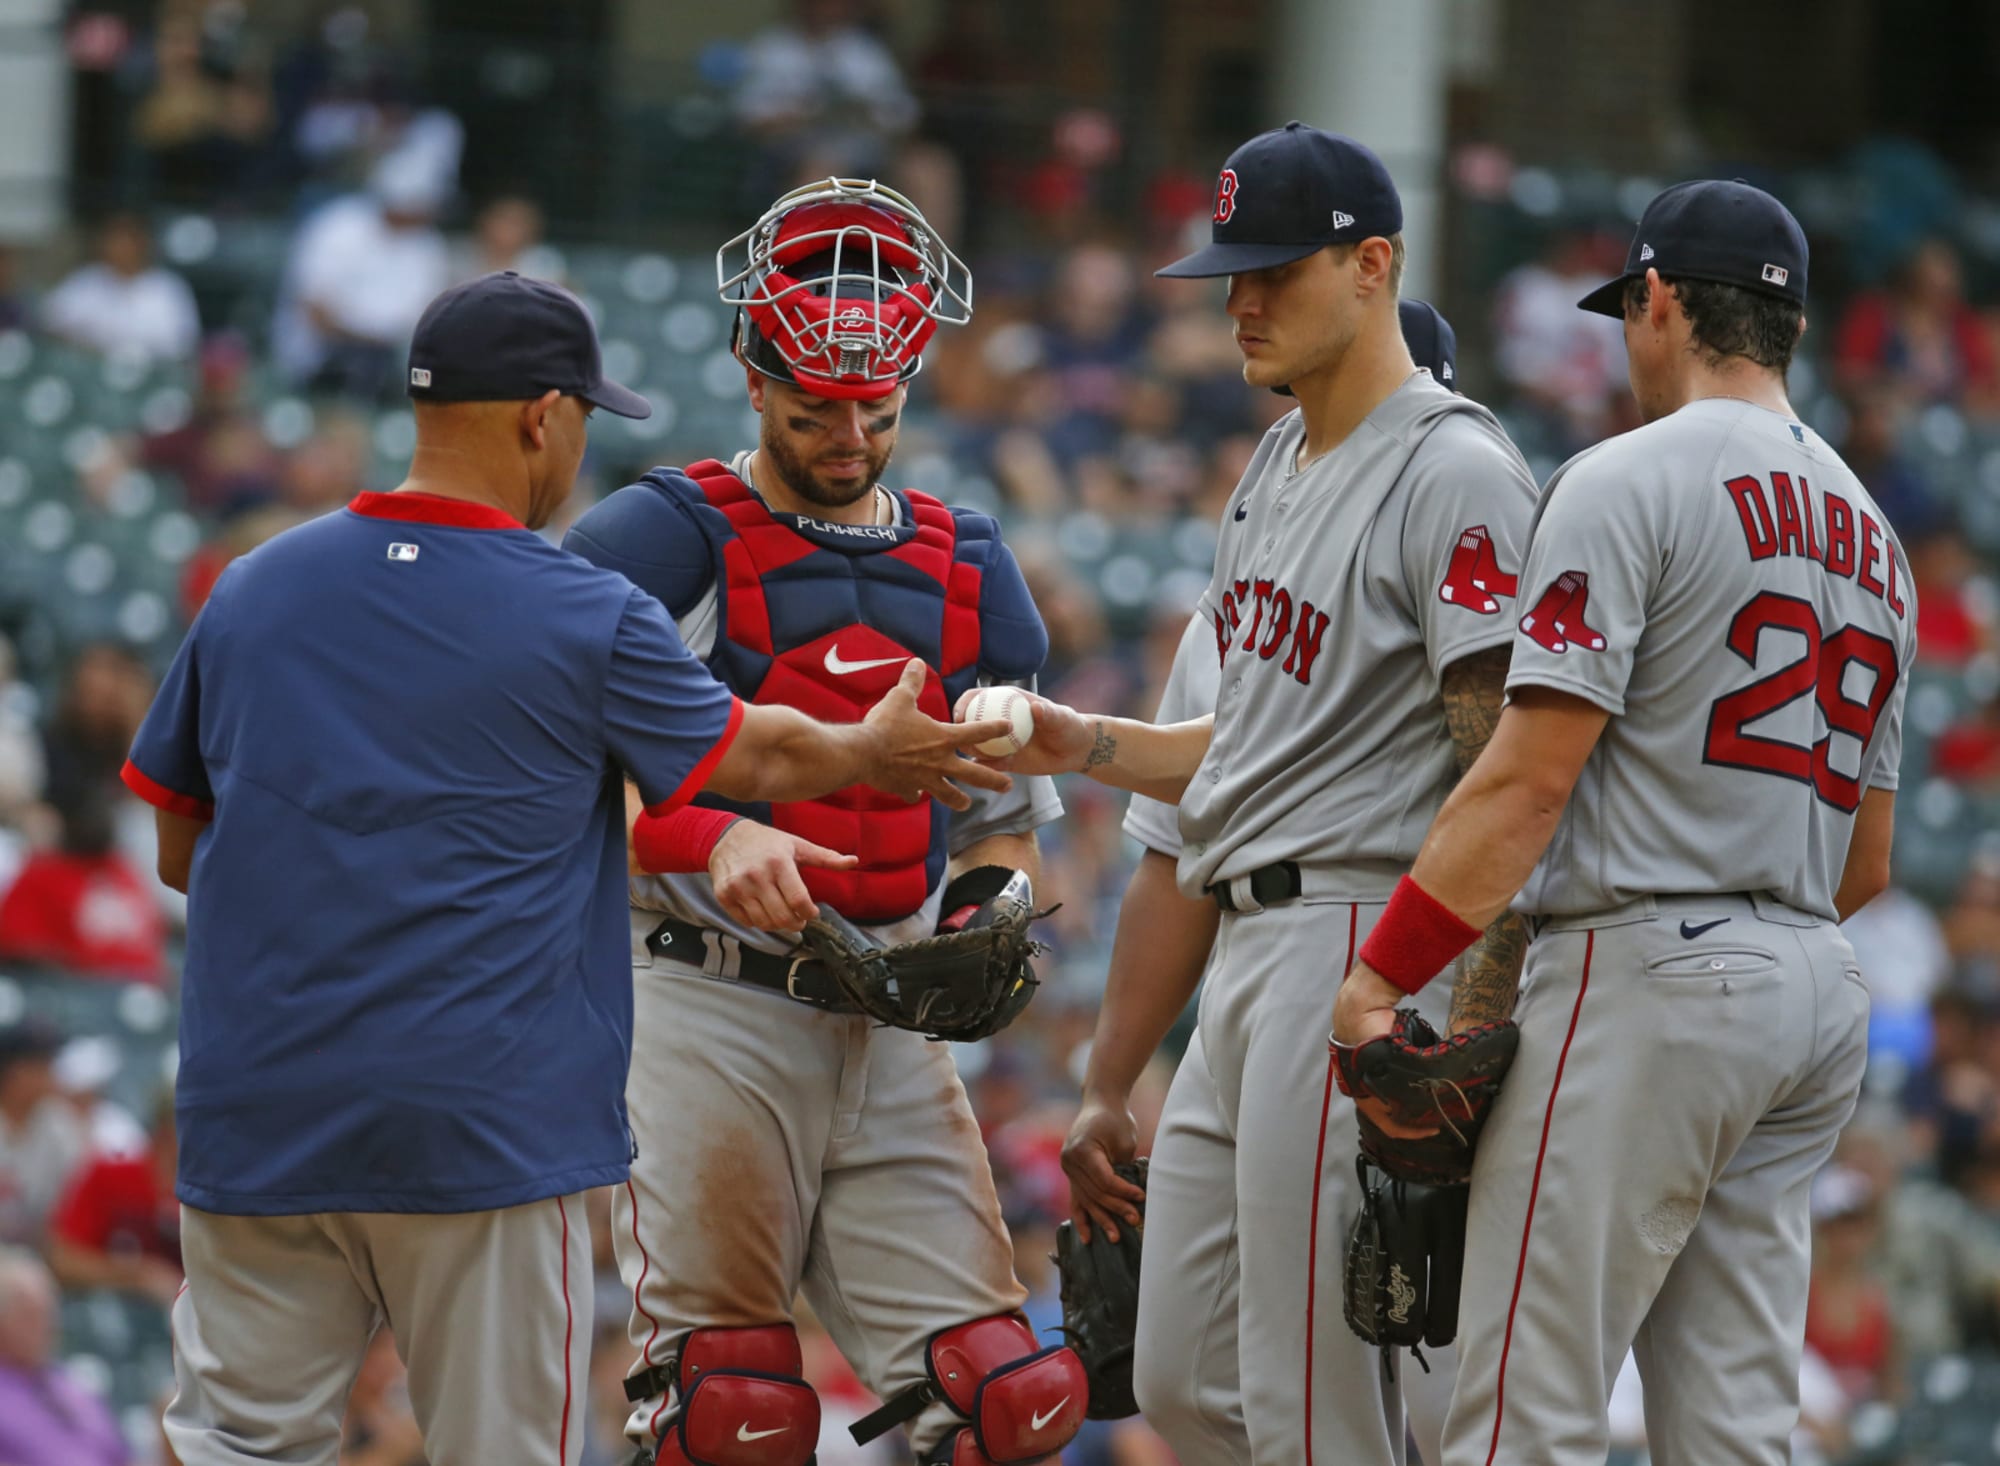 Boston Red Sox: Series against Rays will make or break the season - Chowder and Champions